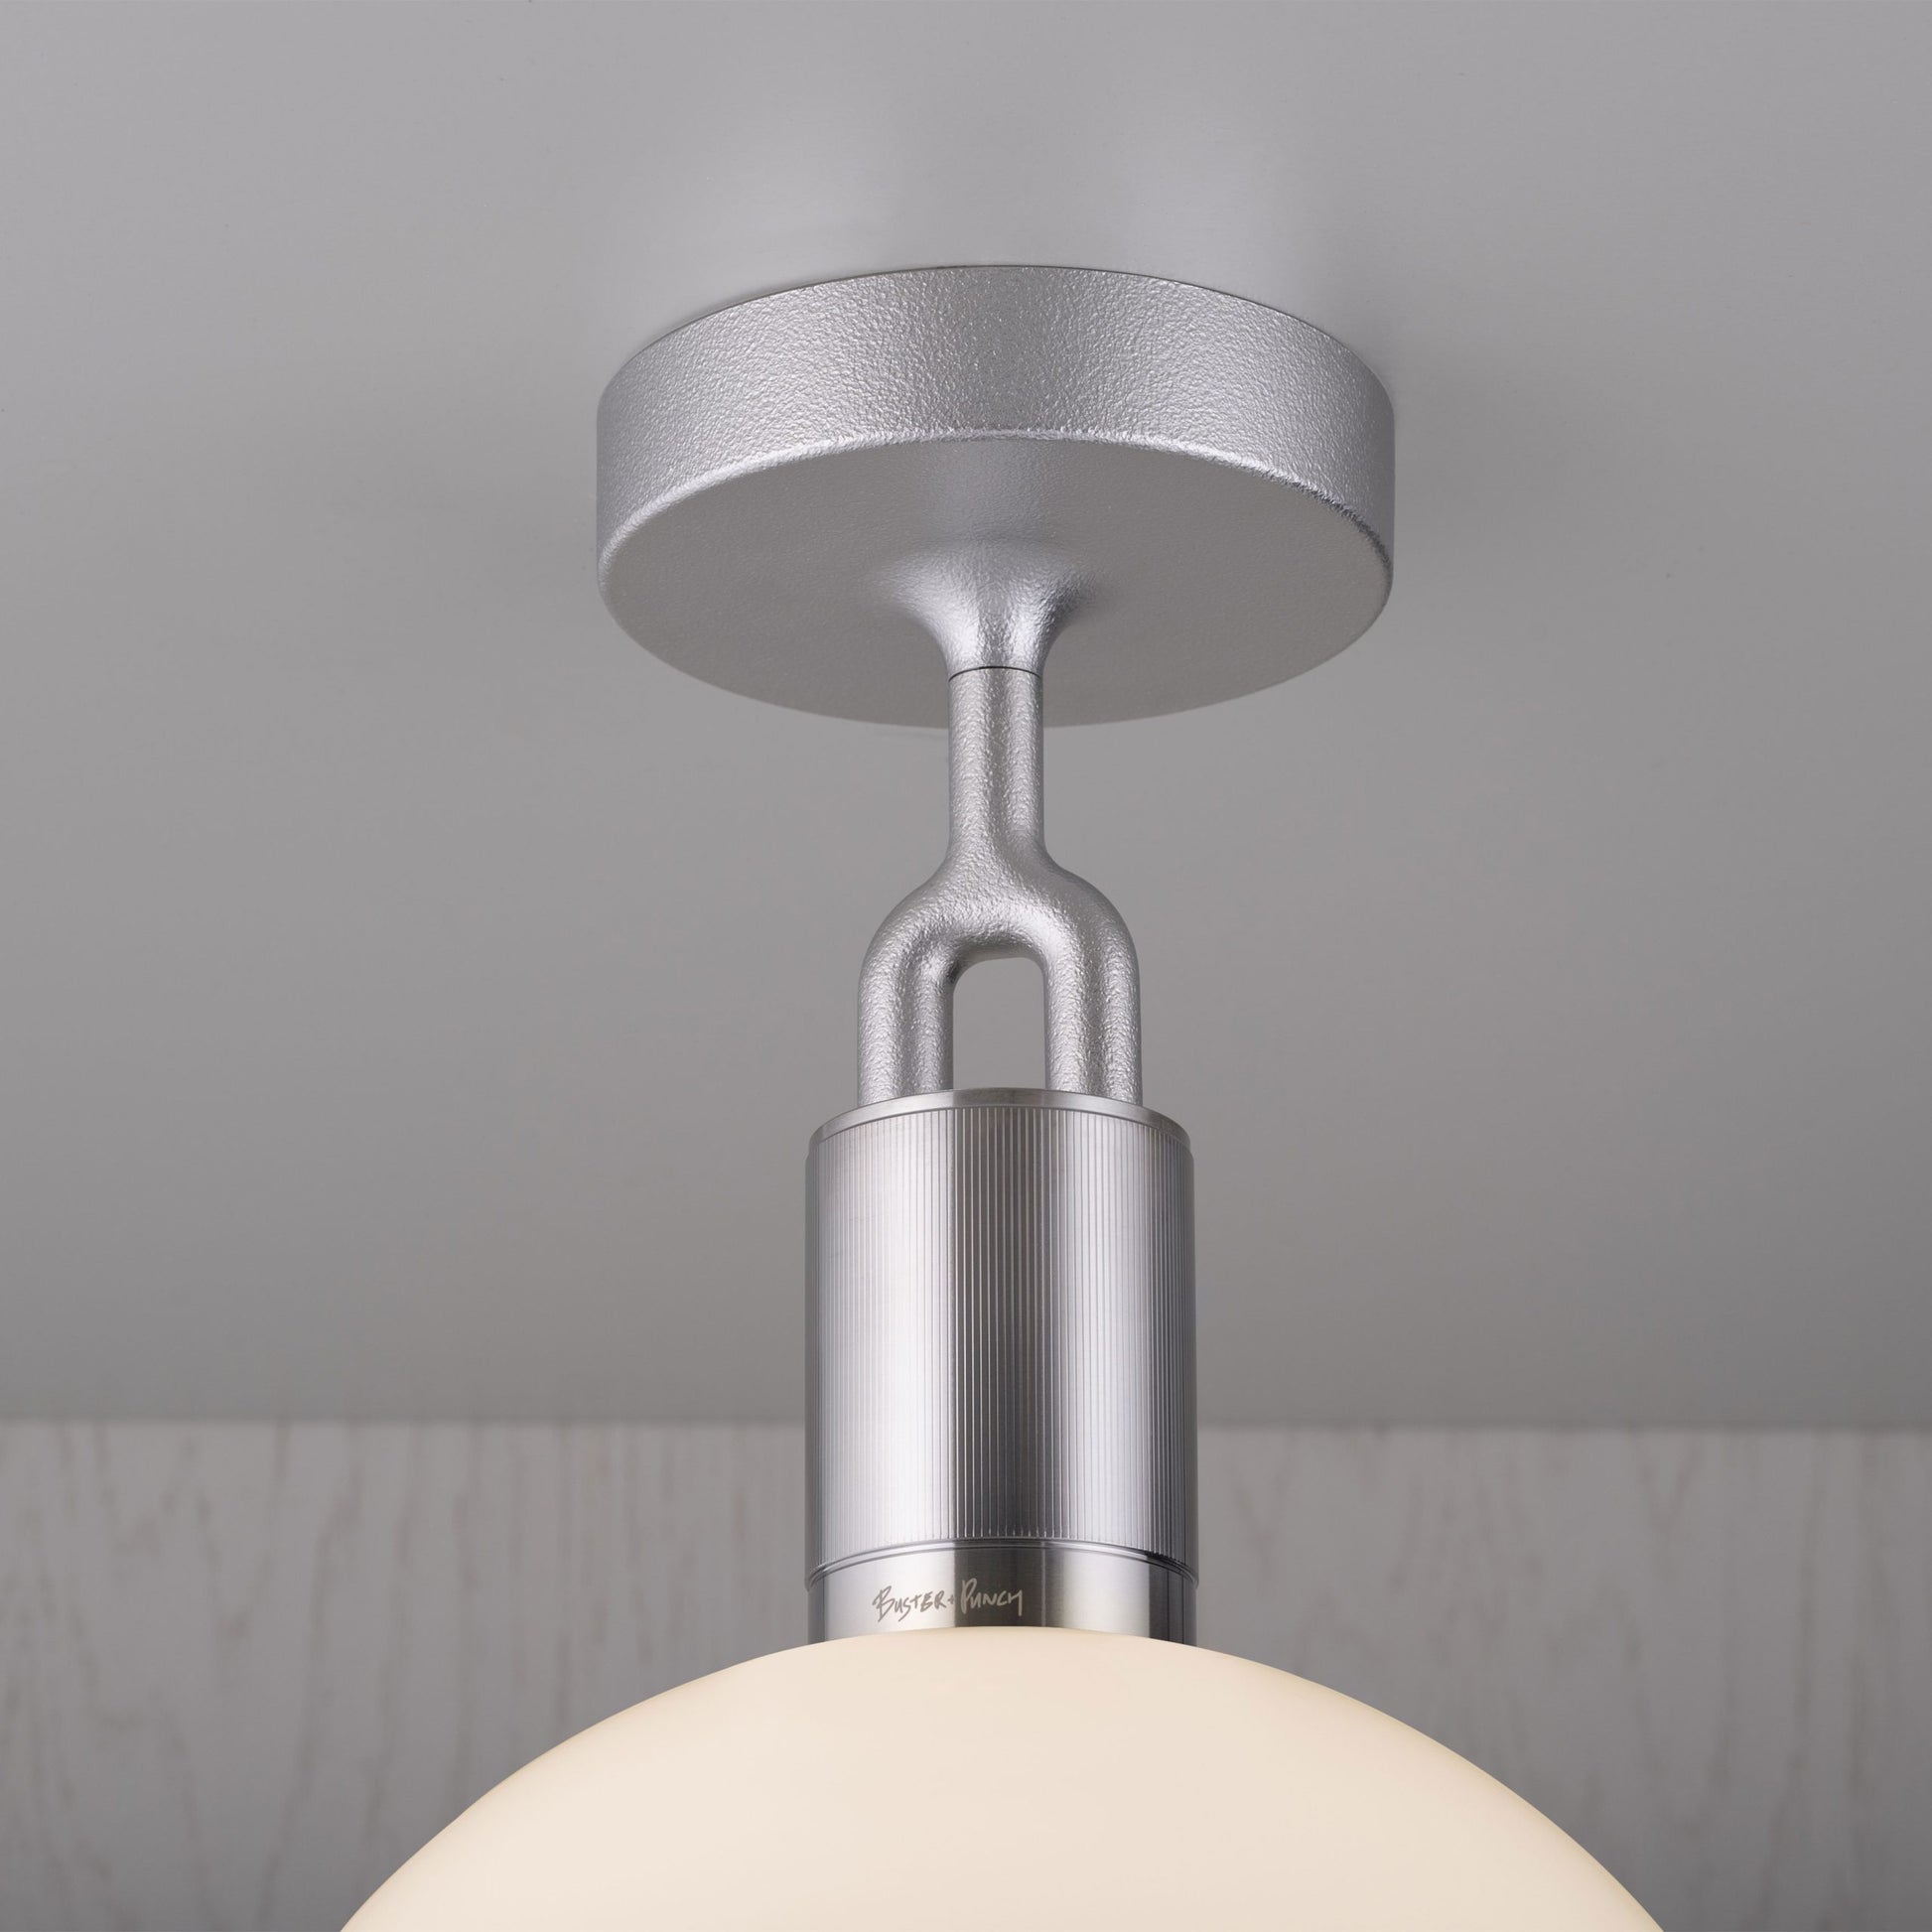 Forked Ceiling Light / Globe / Opal / Medium Steel, detailed close up of fork and fitting.